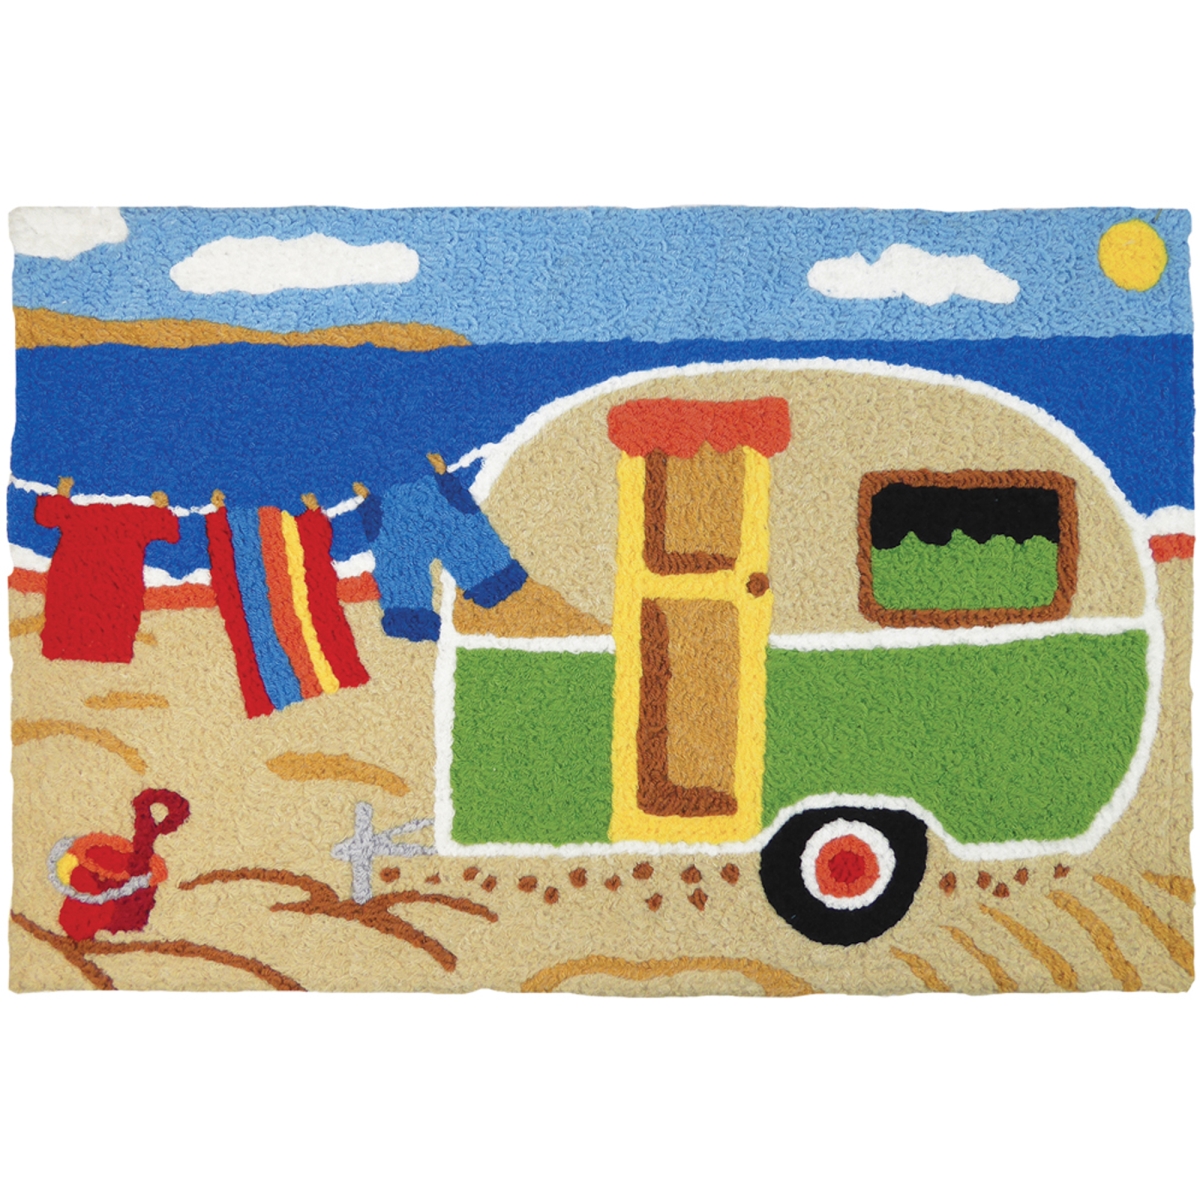 Jb-ce038 20 X 30 In. Camping At The Beach Rug